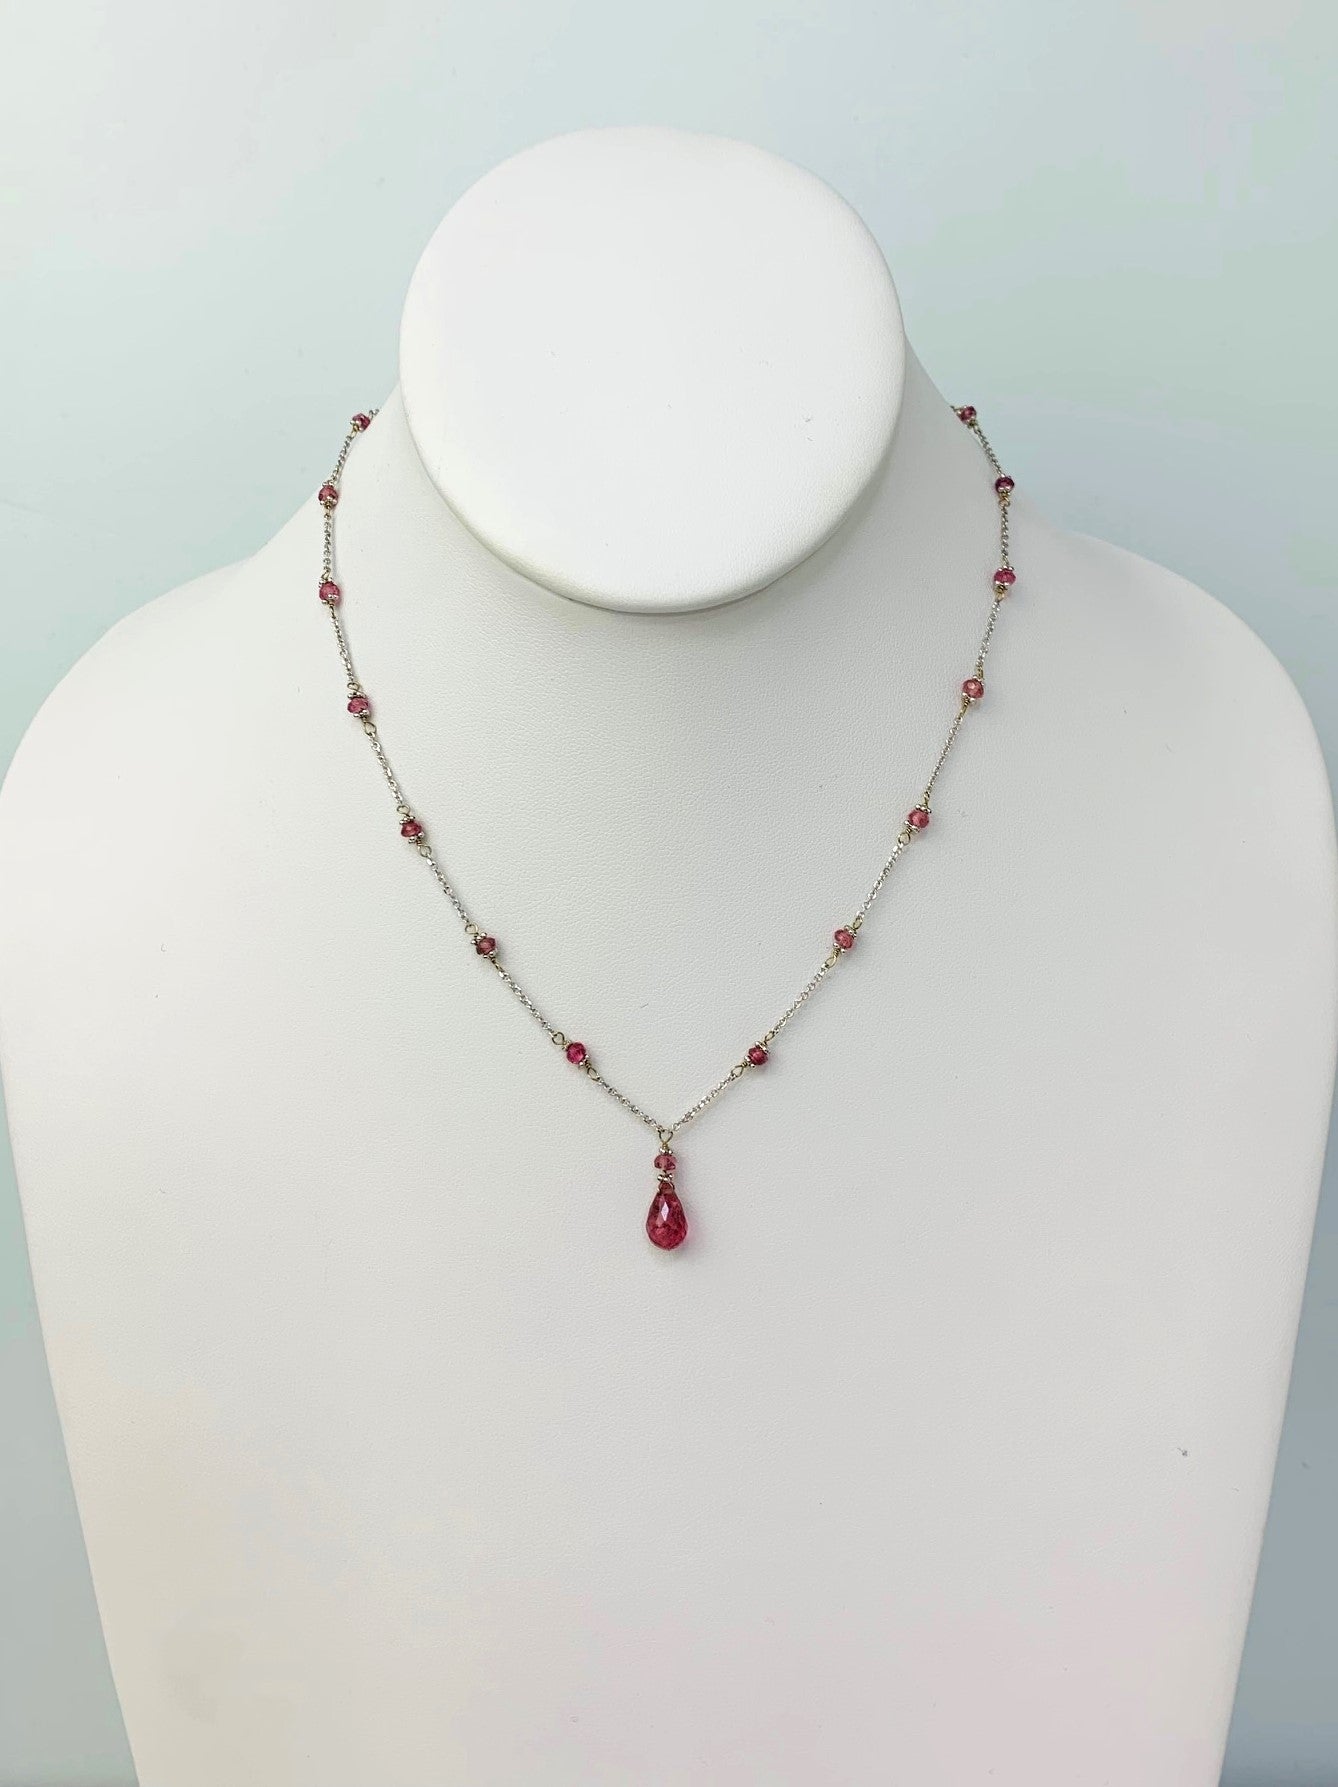 15-16" Pink Tourmaline Station Necklace With Pear Drop Center in 14KW - NCK-395-TNCDRPGM14W-PKT-16